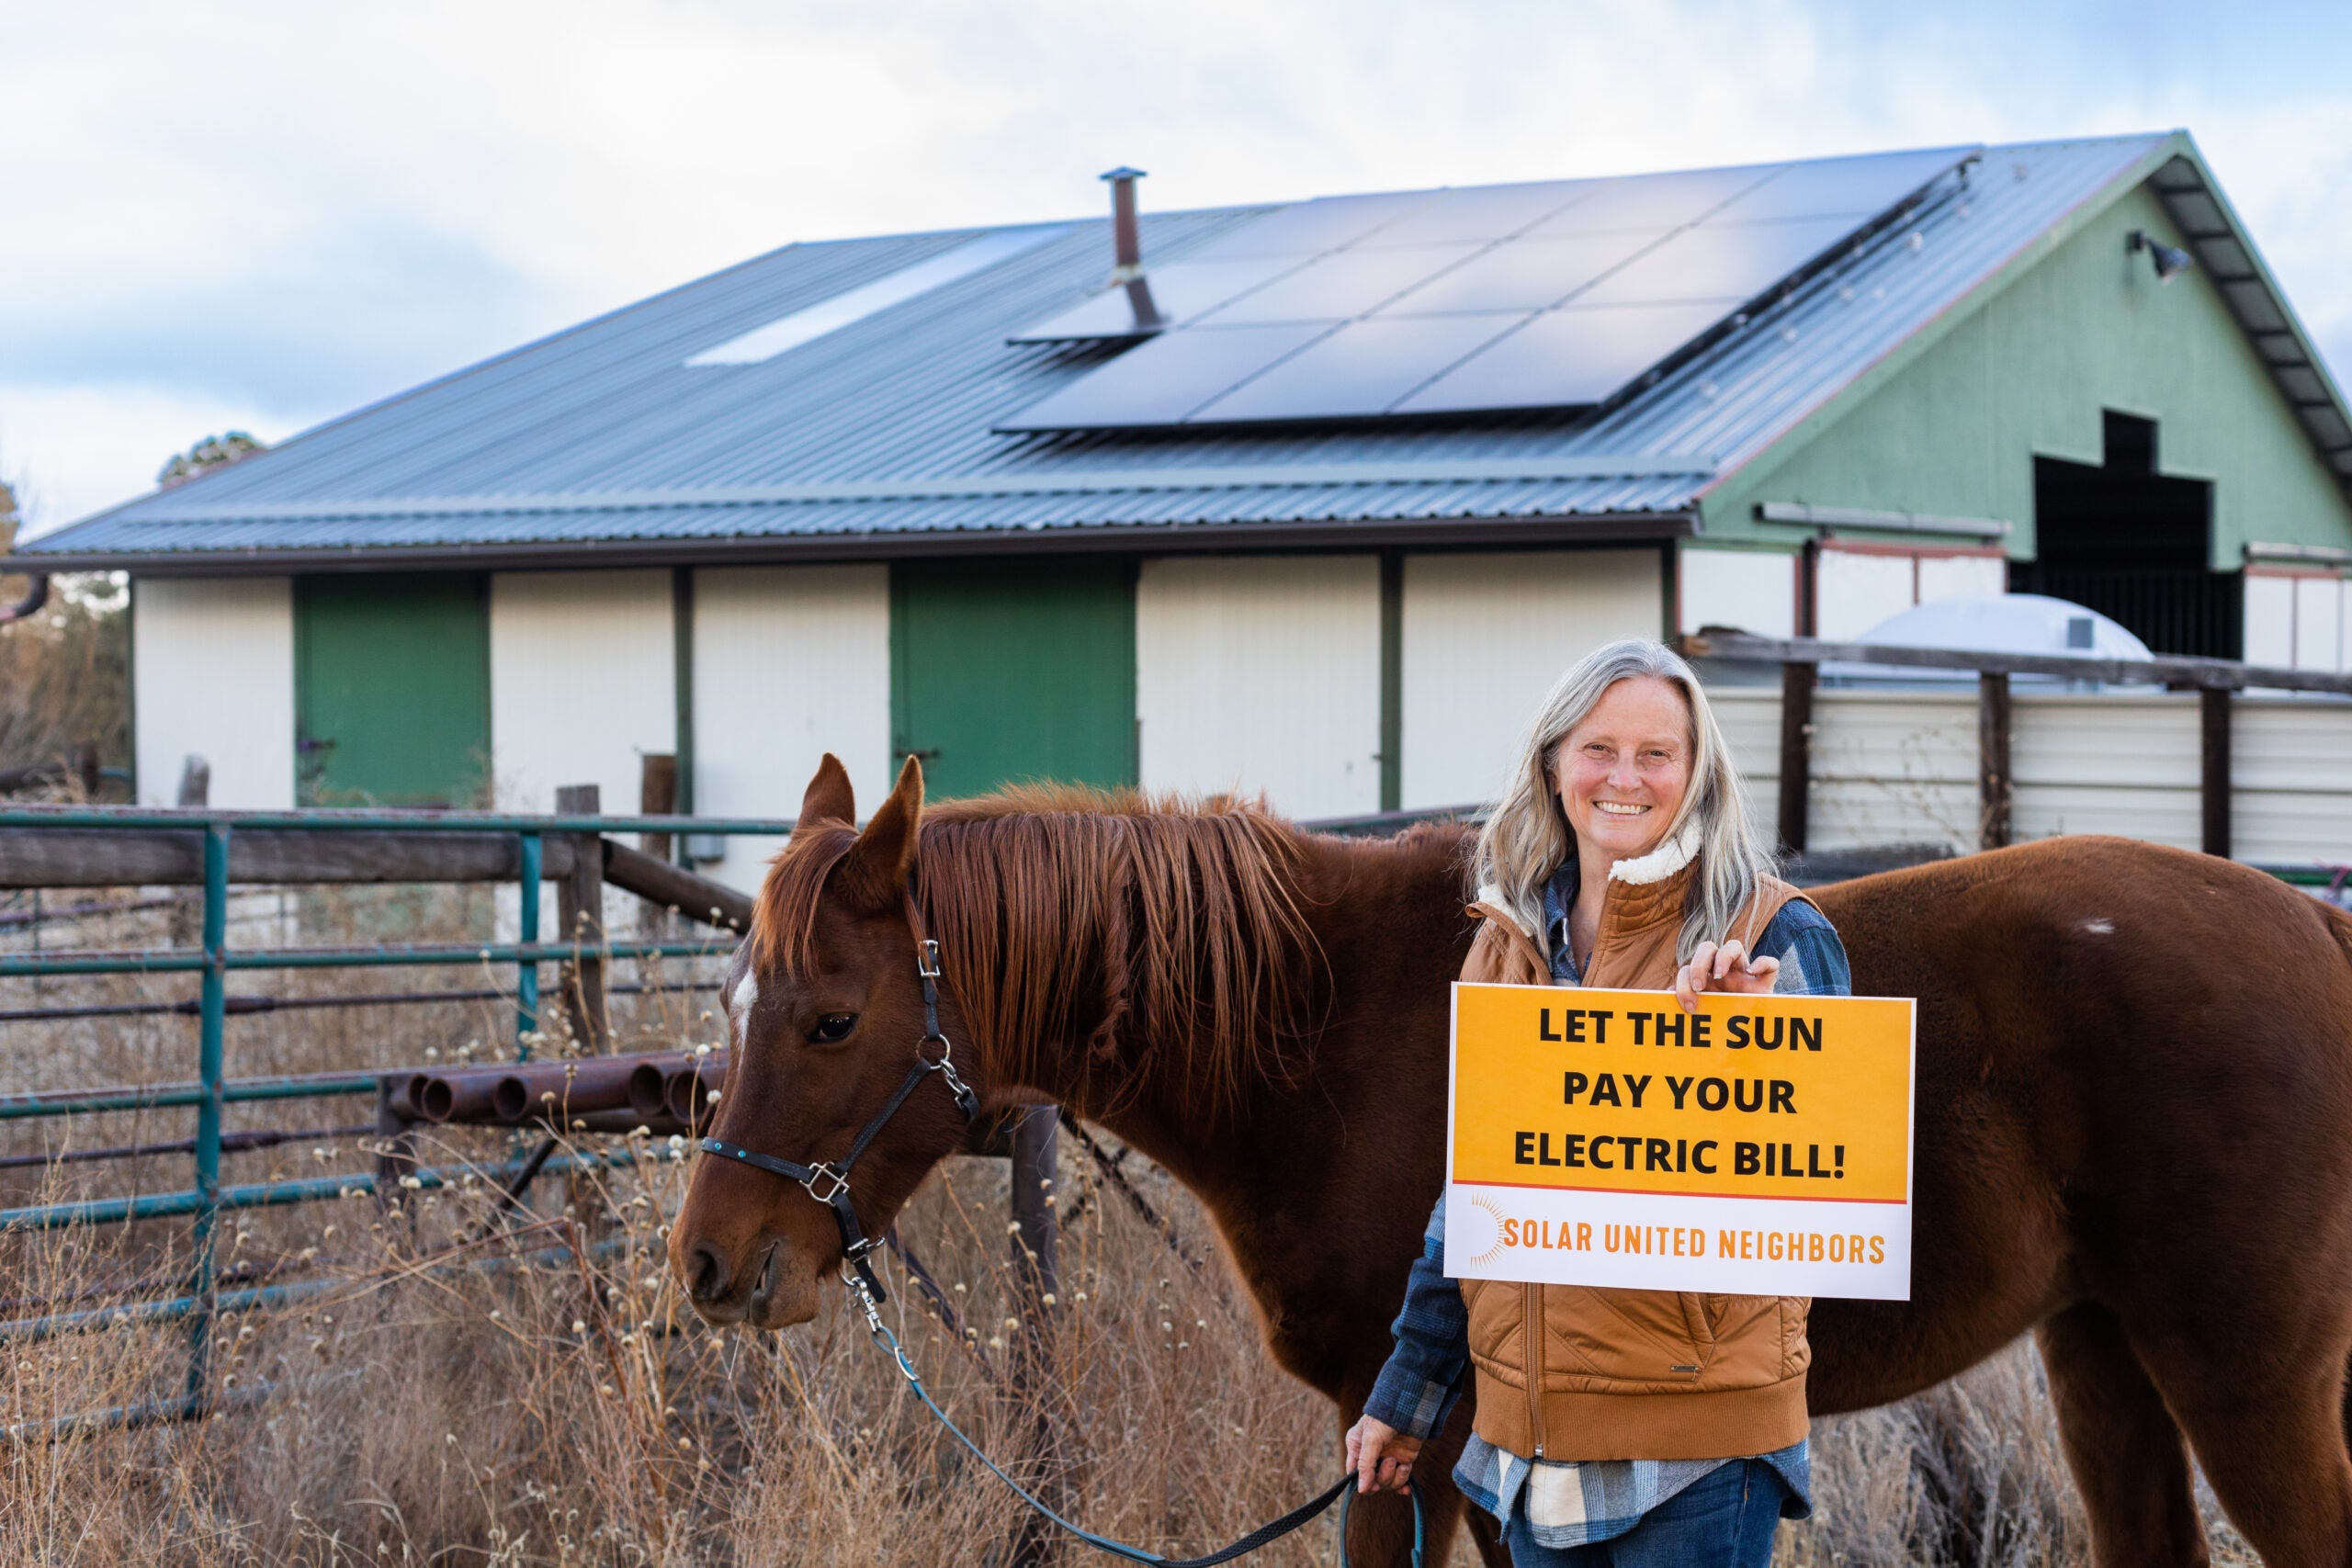 Co-op member holding "Let the sun pay yoour electicity bill!" sign with a brown horse next to them. Solar array on barn in the background.